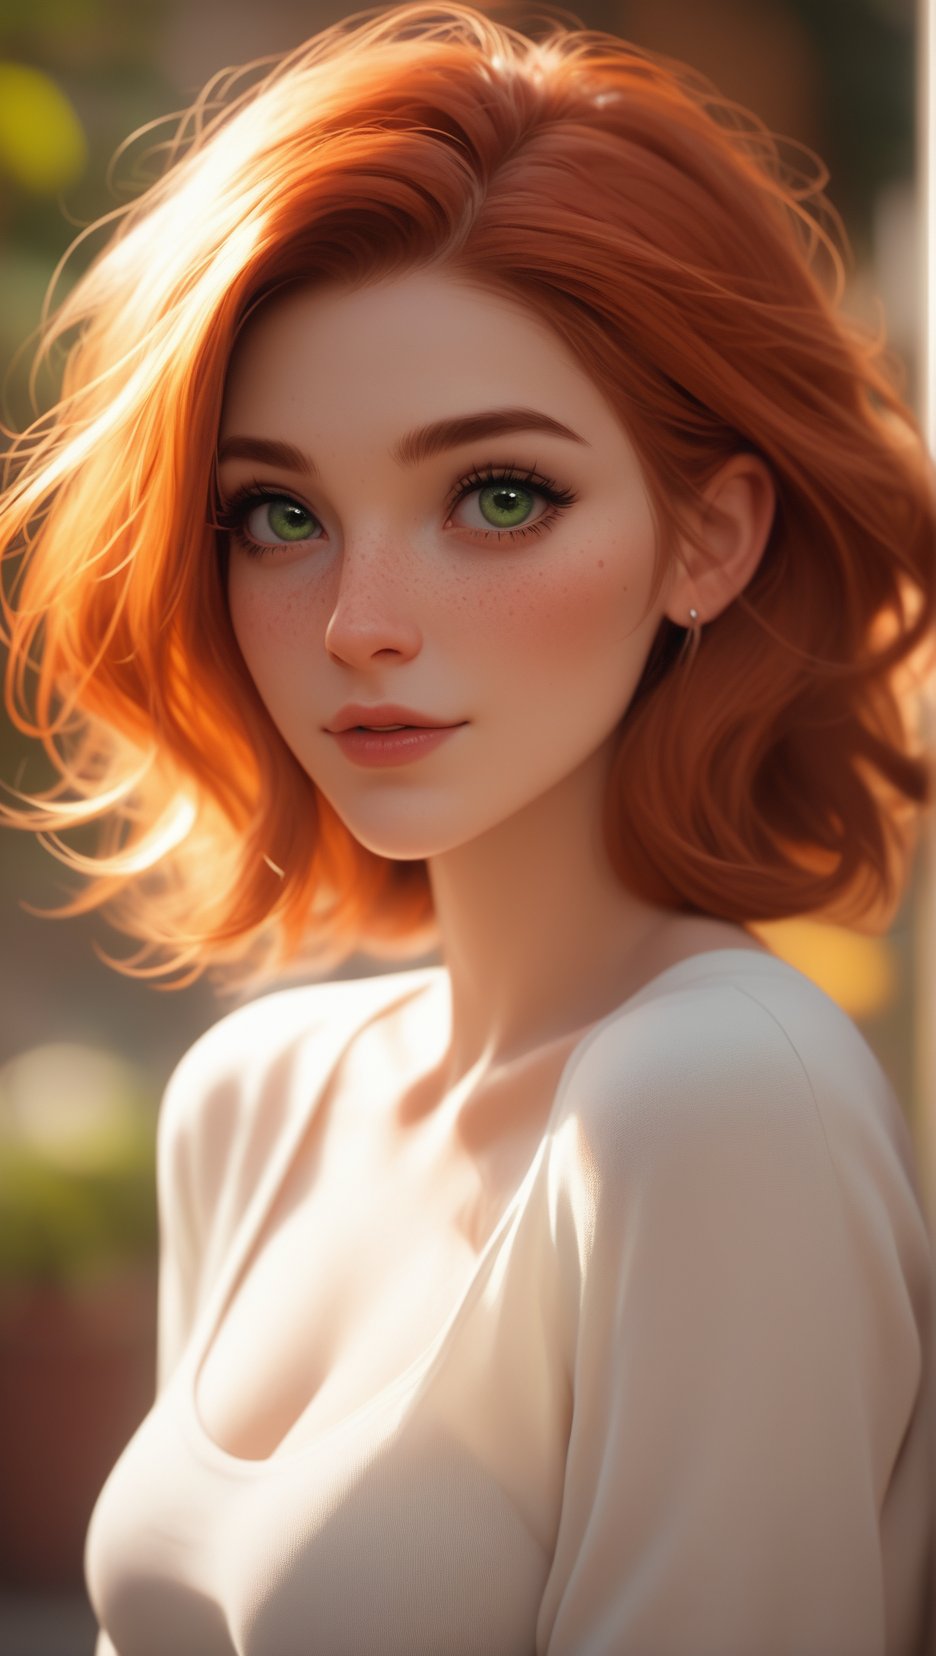 score_9, score_8_up, score_7_up, rating_questionable, girl, freckles, extremely attractive, adorable, cute, extremely pale skin, orange hair, green eyes, light directed at face, 8k, redhead,studio lighting,